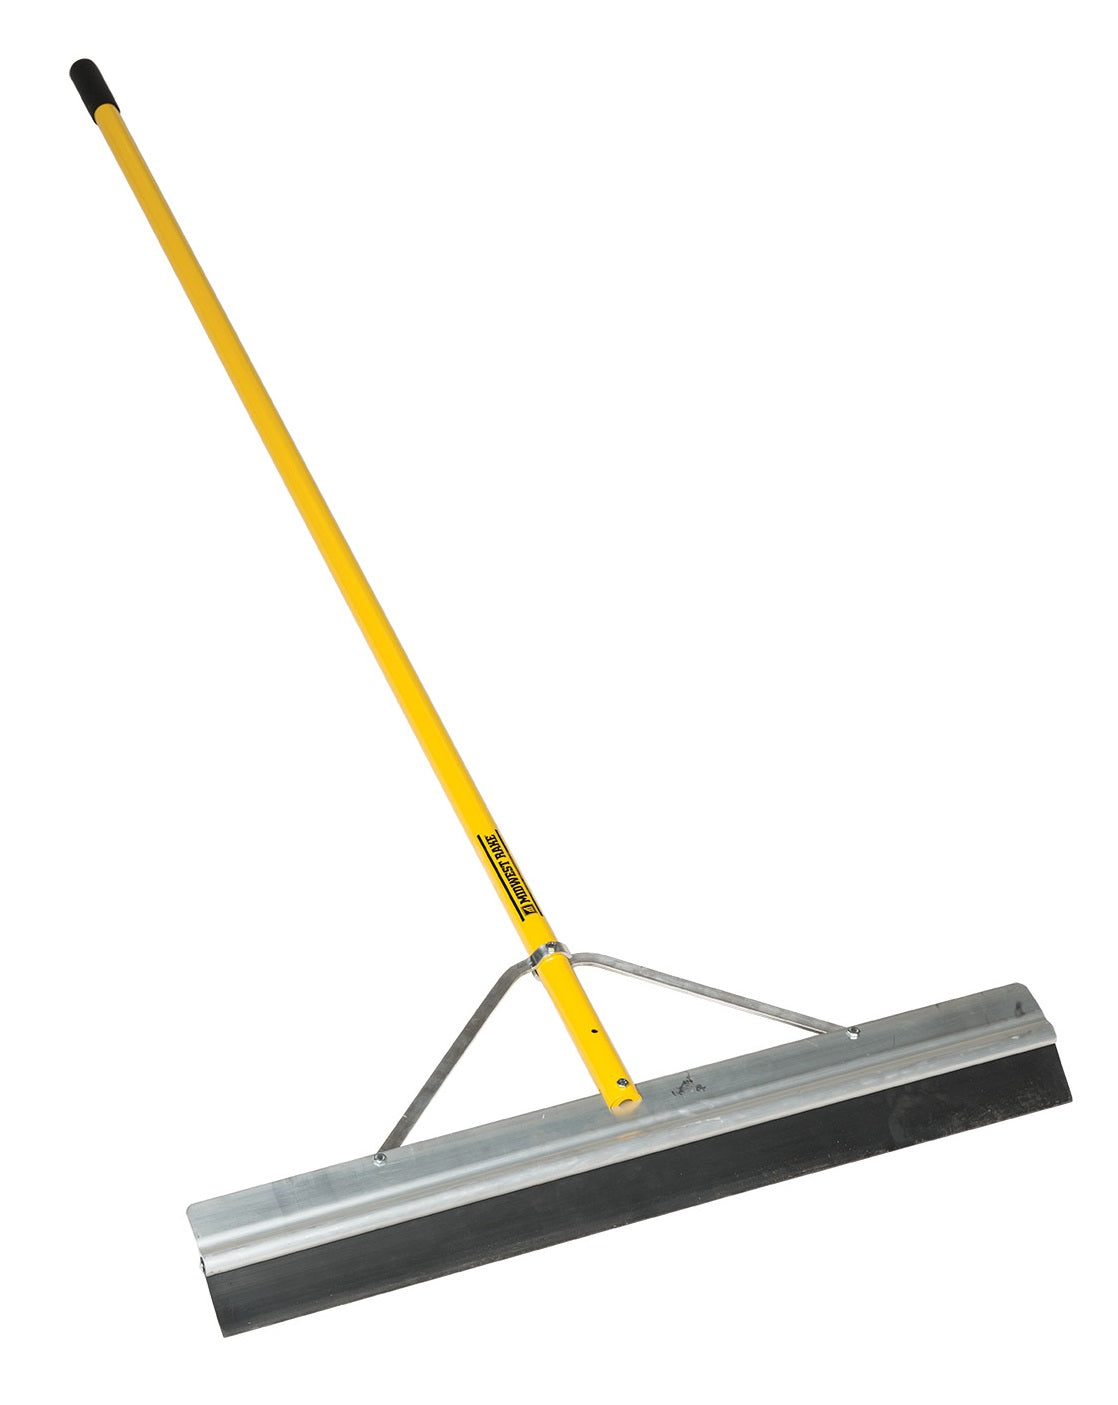 Sealcoat Squeegee, 36 Rubber Blade